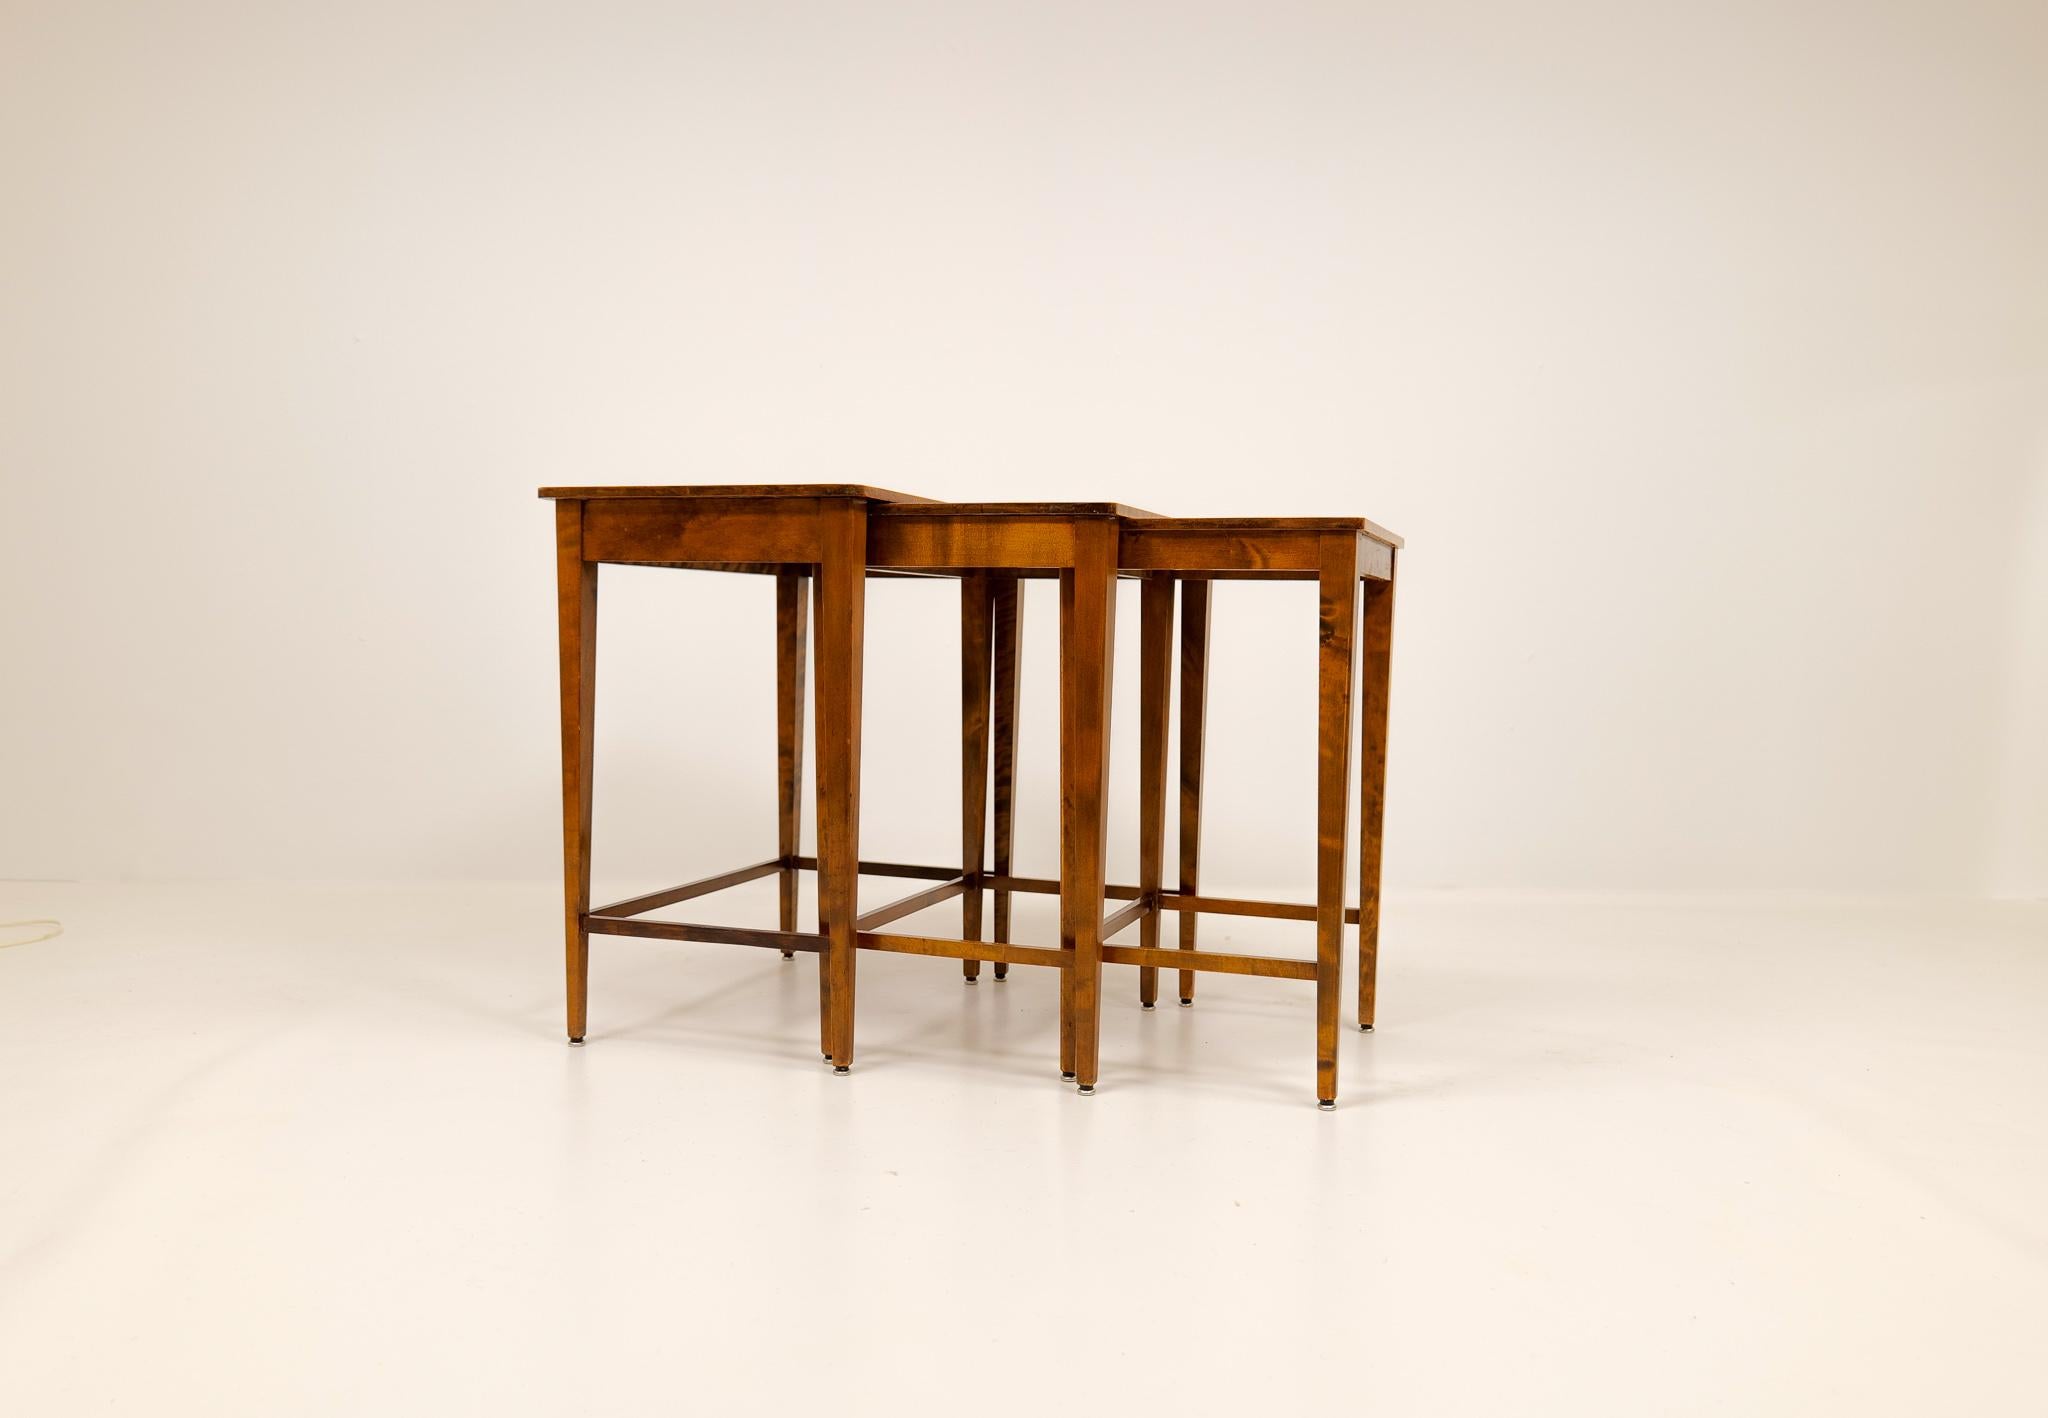 Swedish Art Deco Nesting Tables Mahogany and Stained Birch, NK Sweden, 1940s For Sale